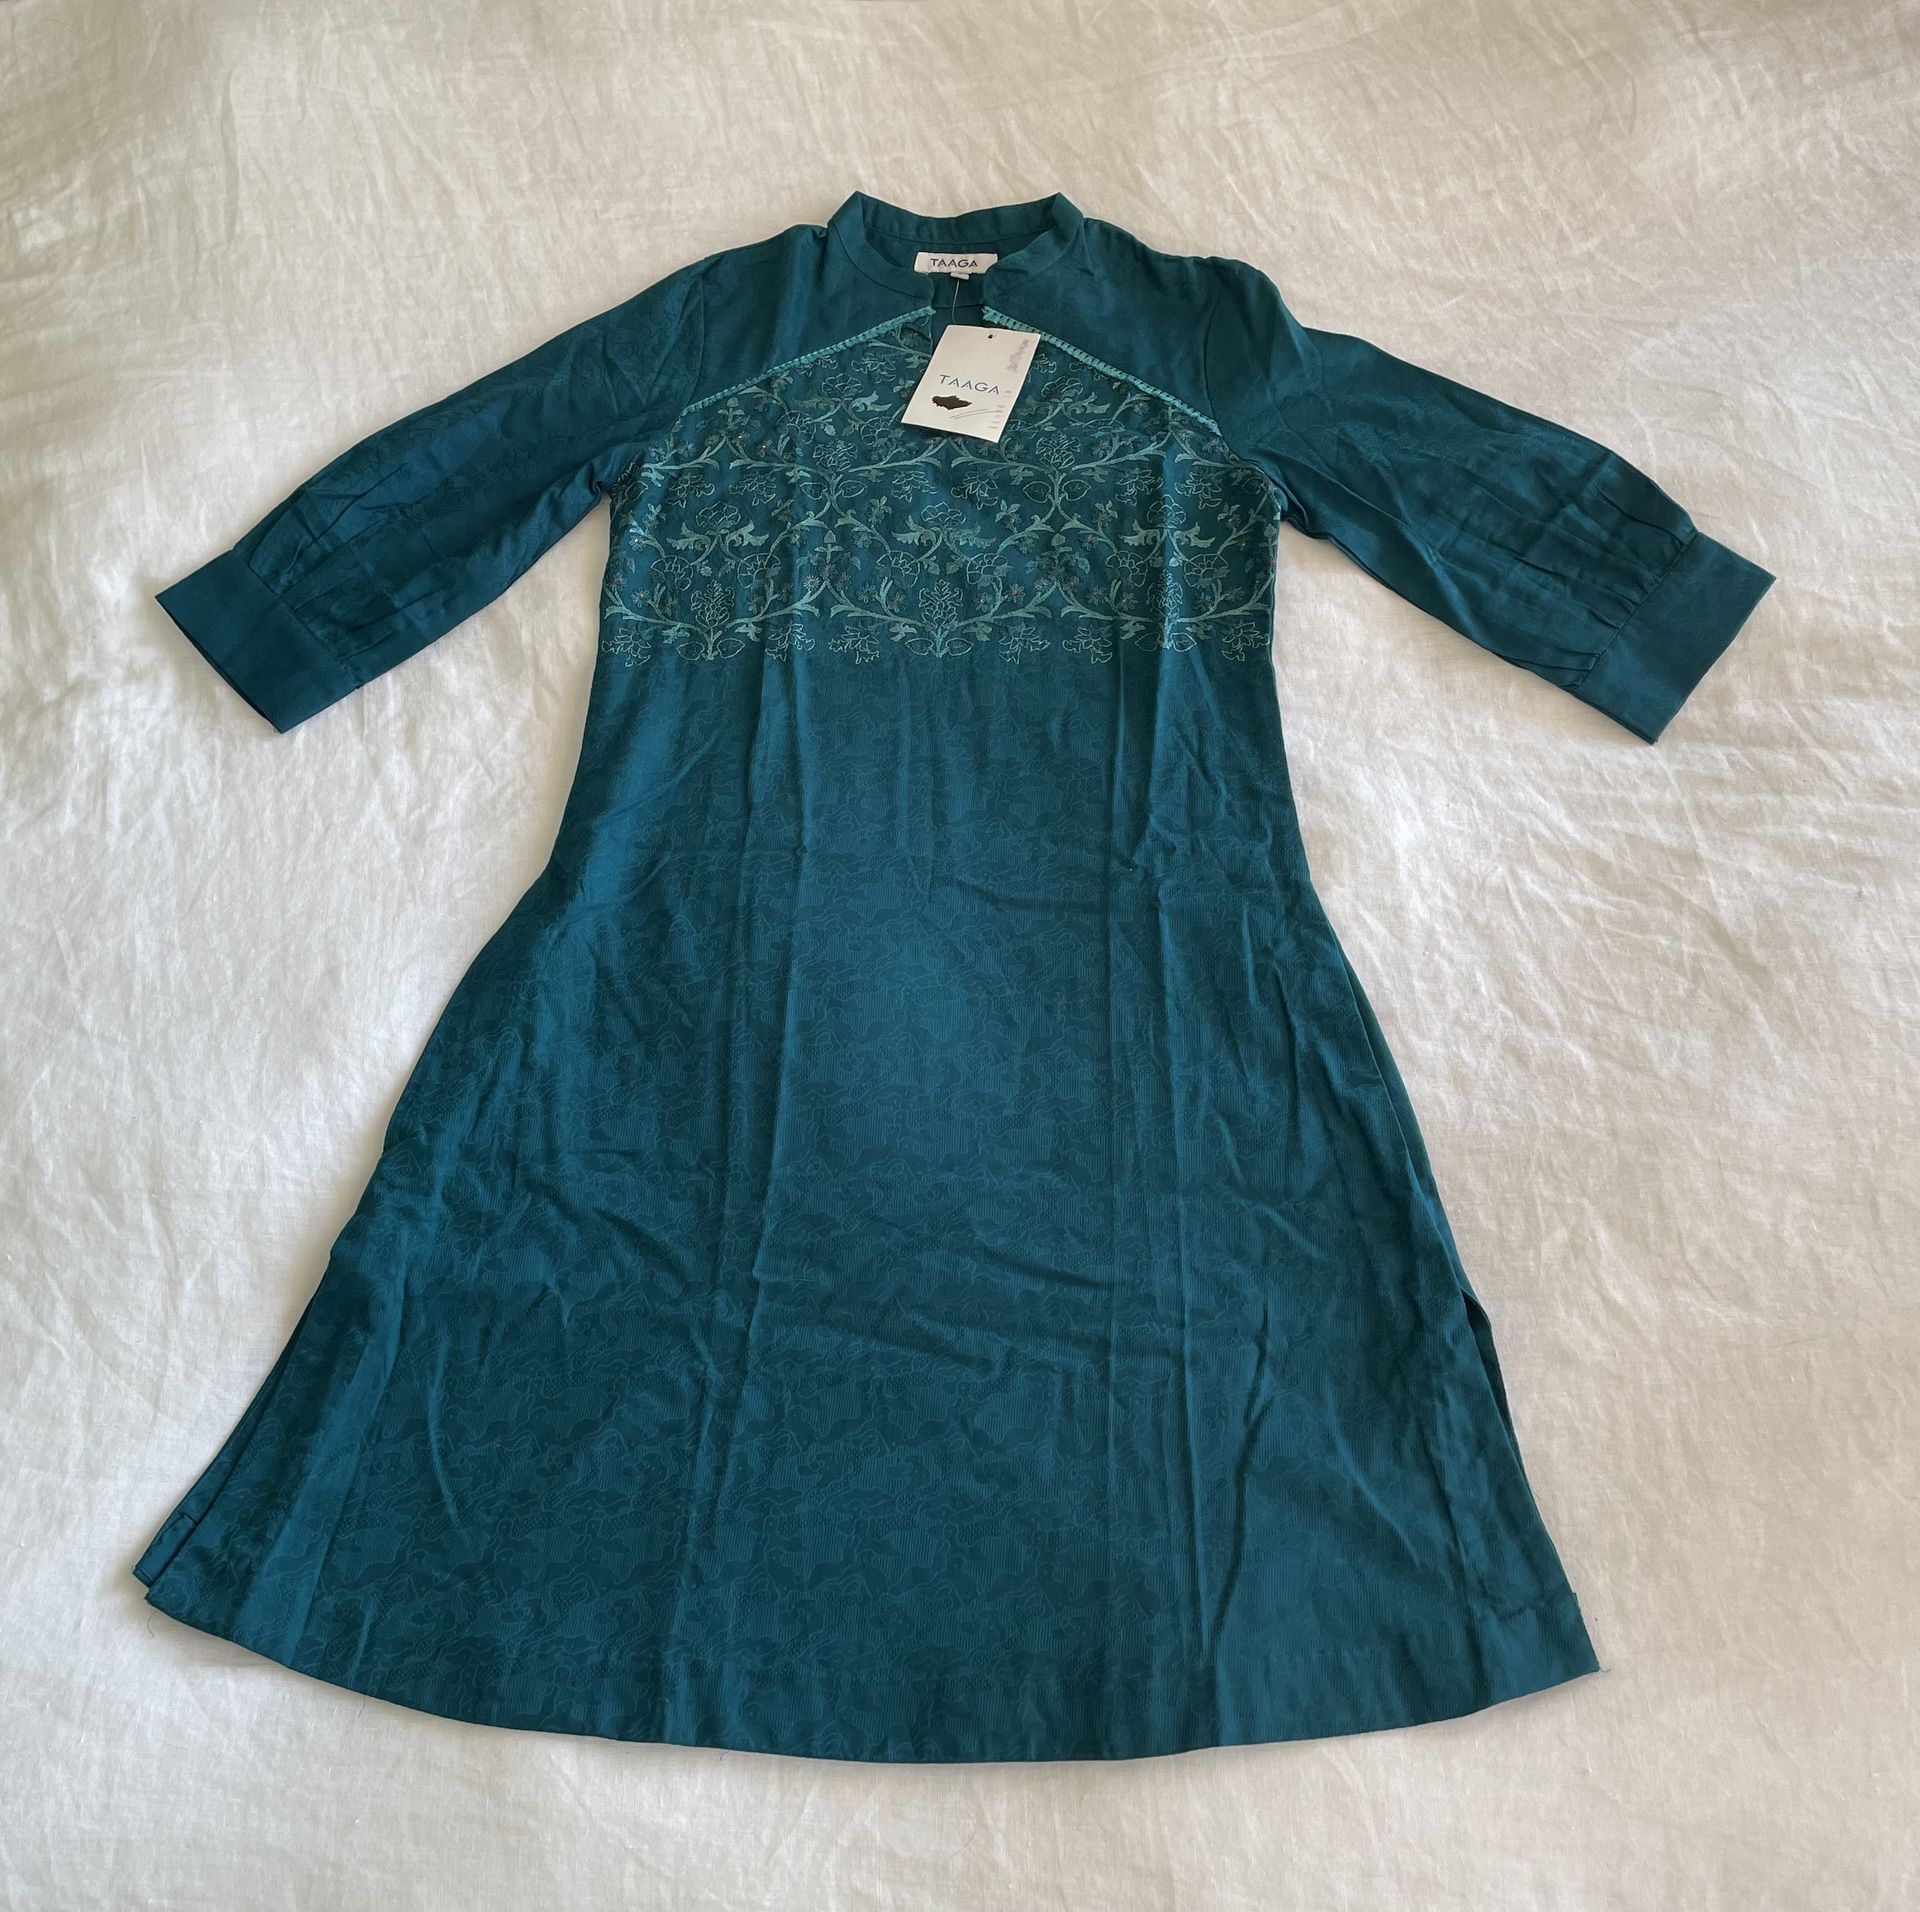 Indian Blue Dress Brand New with Tags